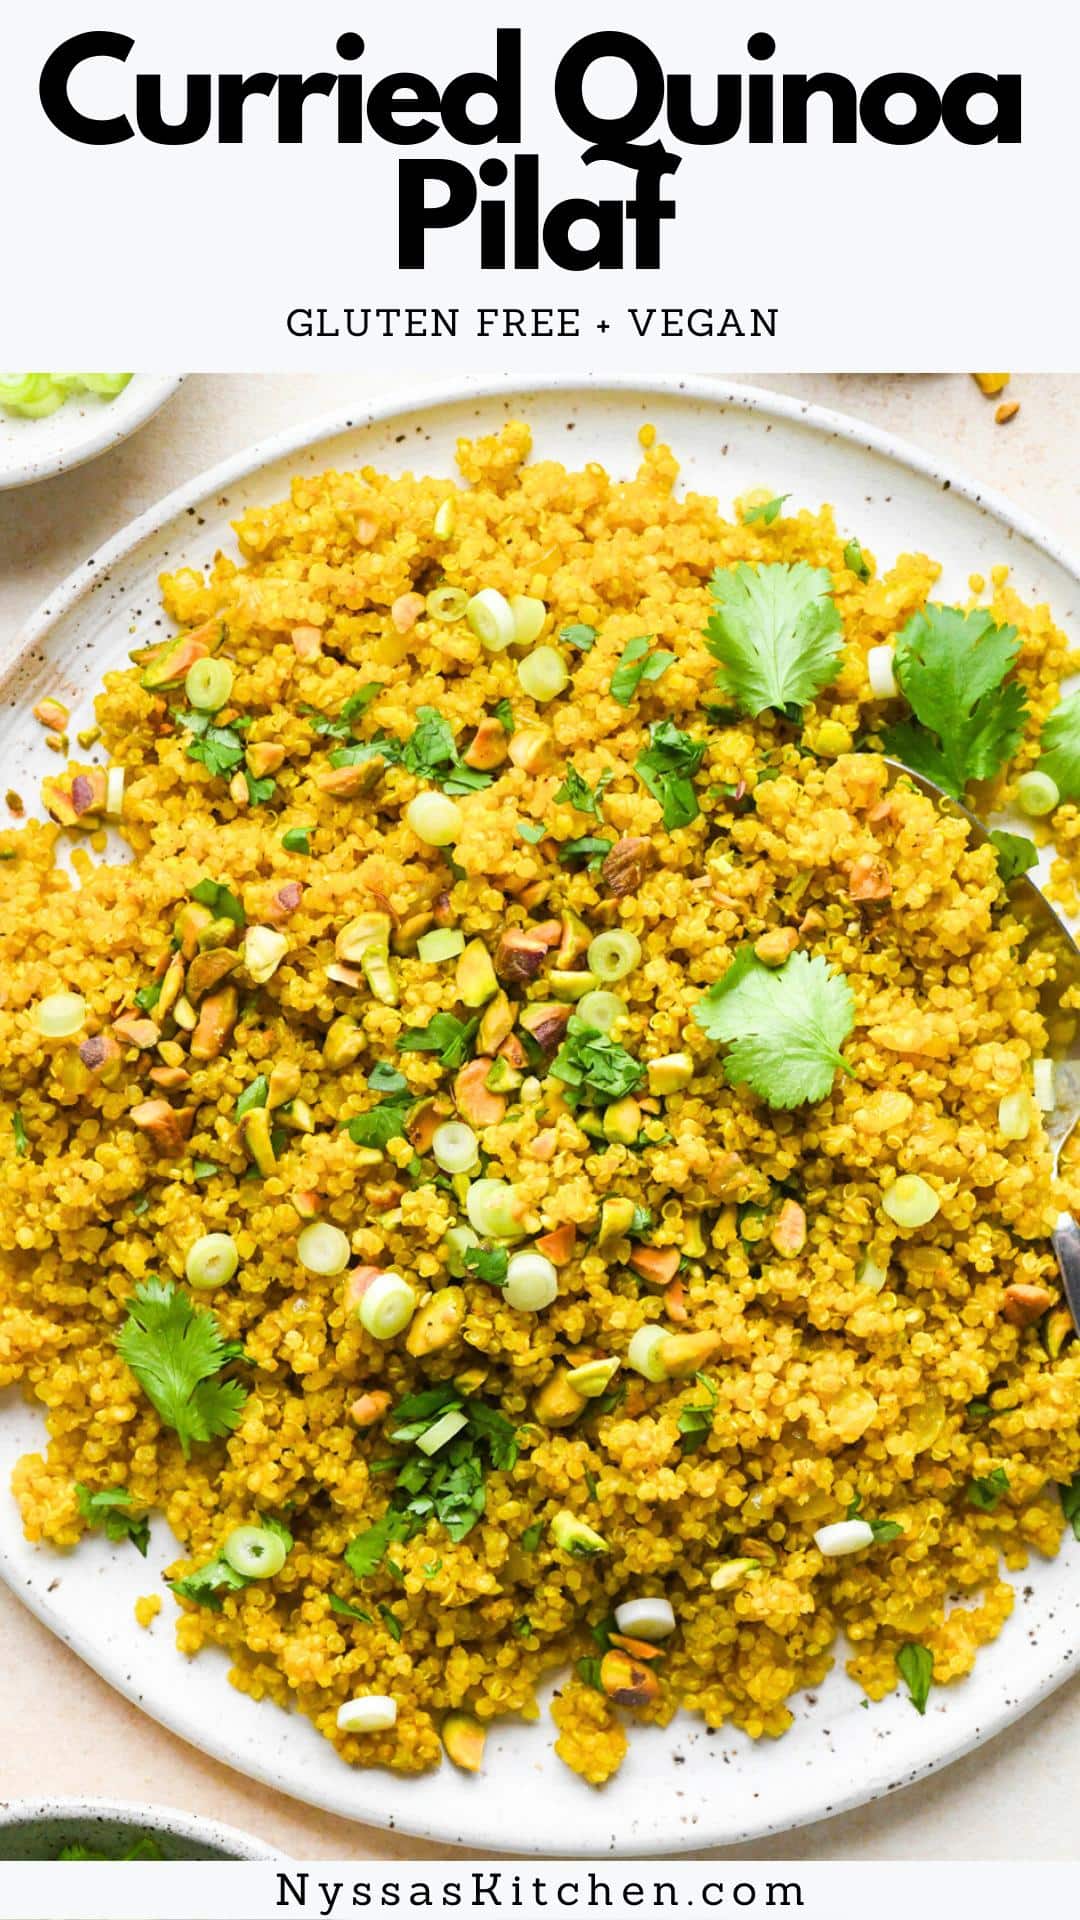 A spiced, aromatic side dish – this curried quinoa pilaf is made with a few simple ingredients and topped with crunchy pistachios, fresh cilantro, and zippy green onions for a boost of flavor and texture that you’ll love! It is easy to make, gluten free, and vegan.